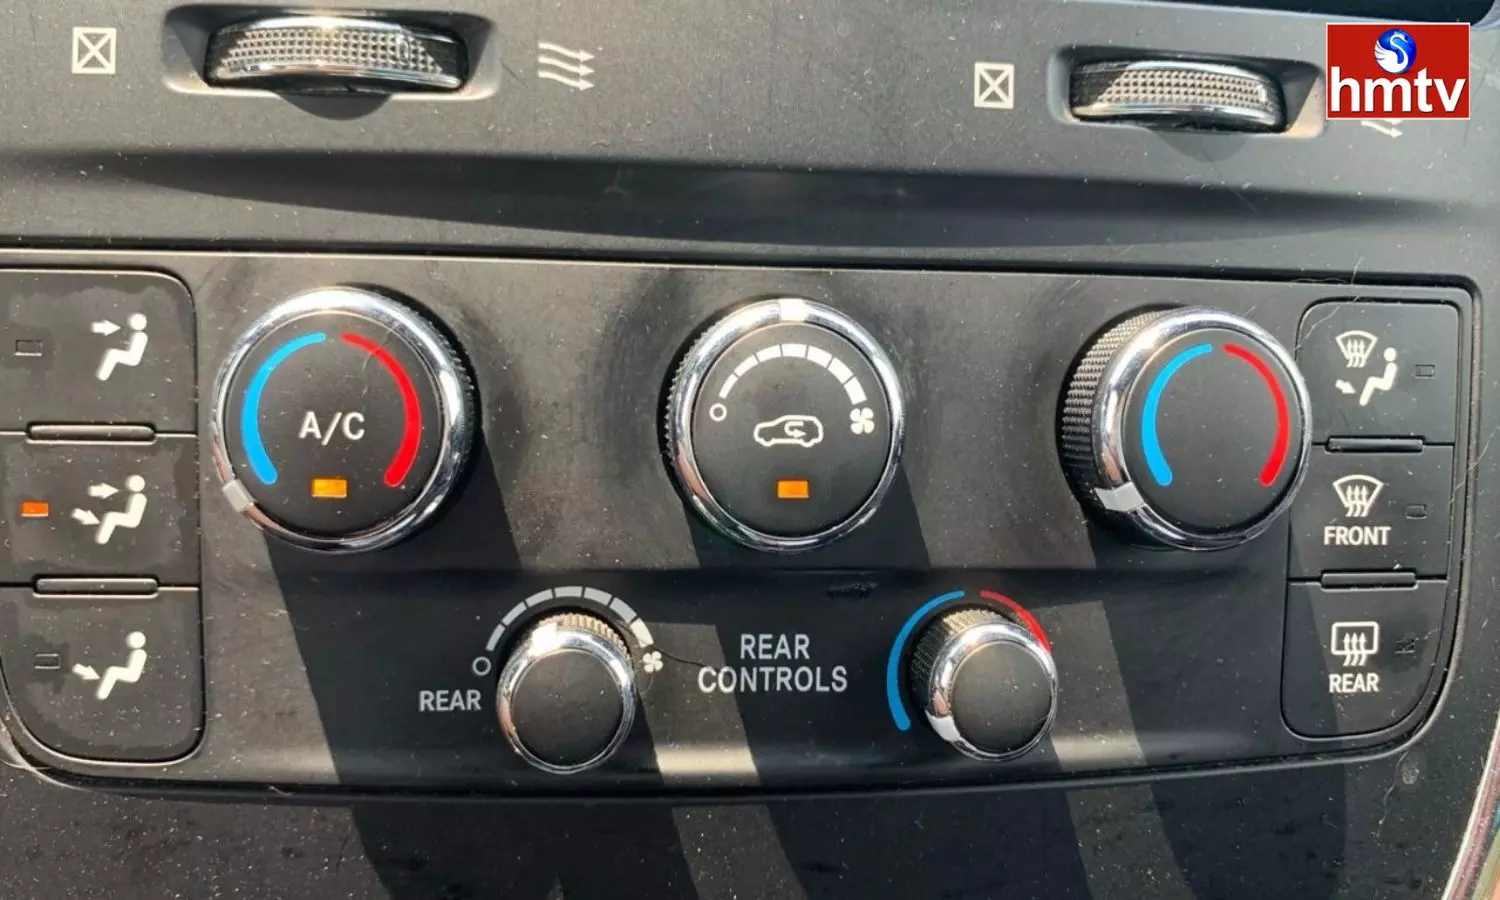 Air Recirculation Button for Faster Cooling Cars in Summer Check how to Use